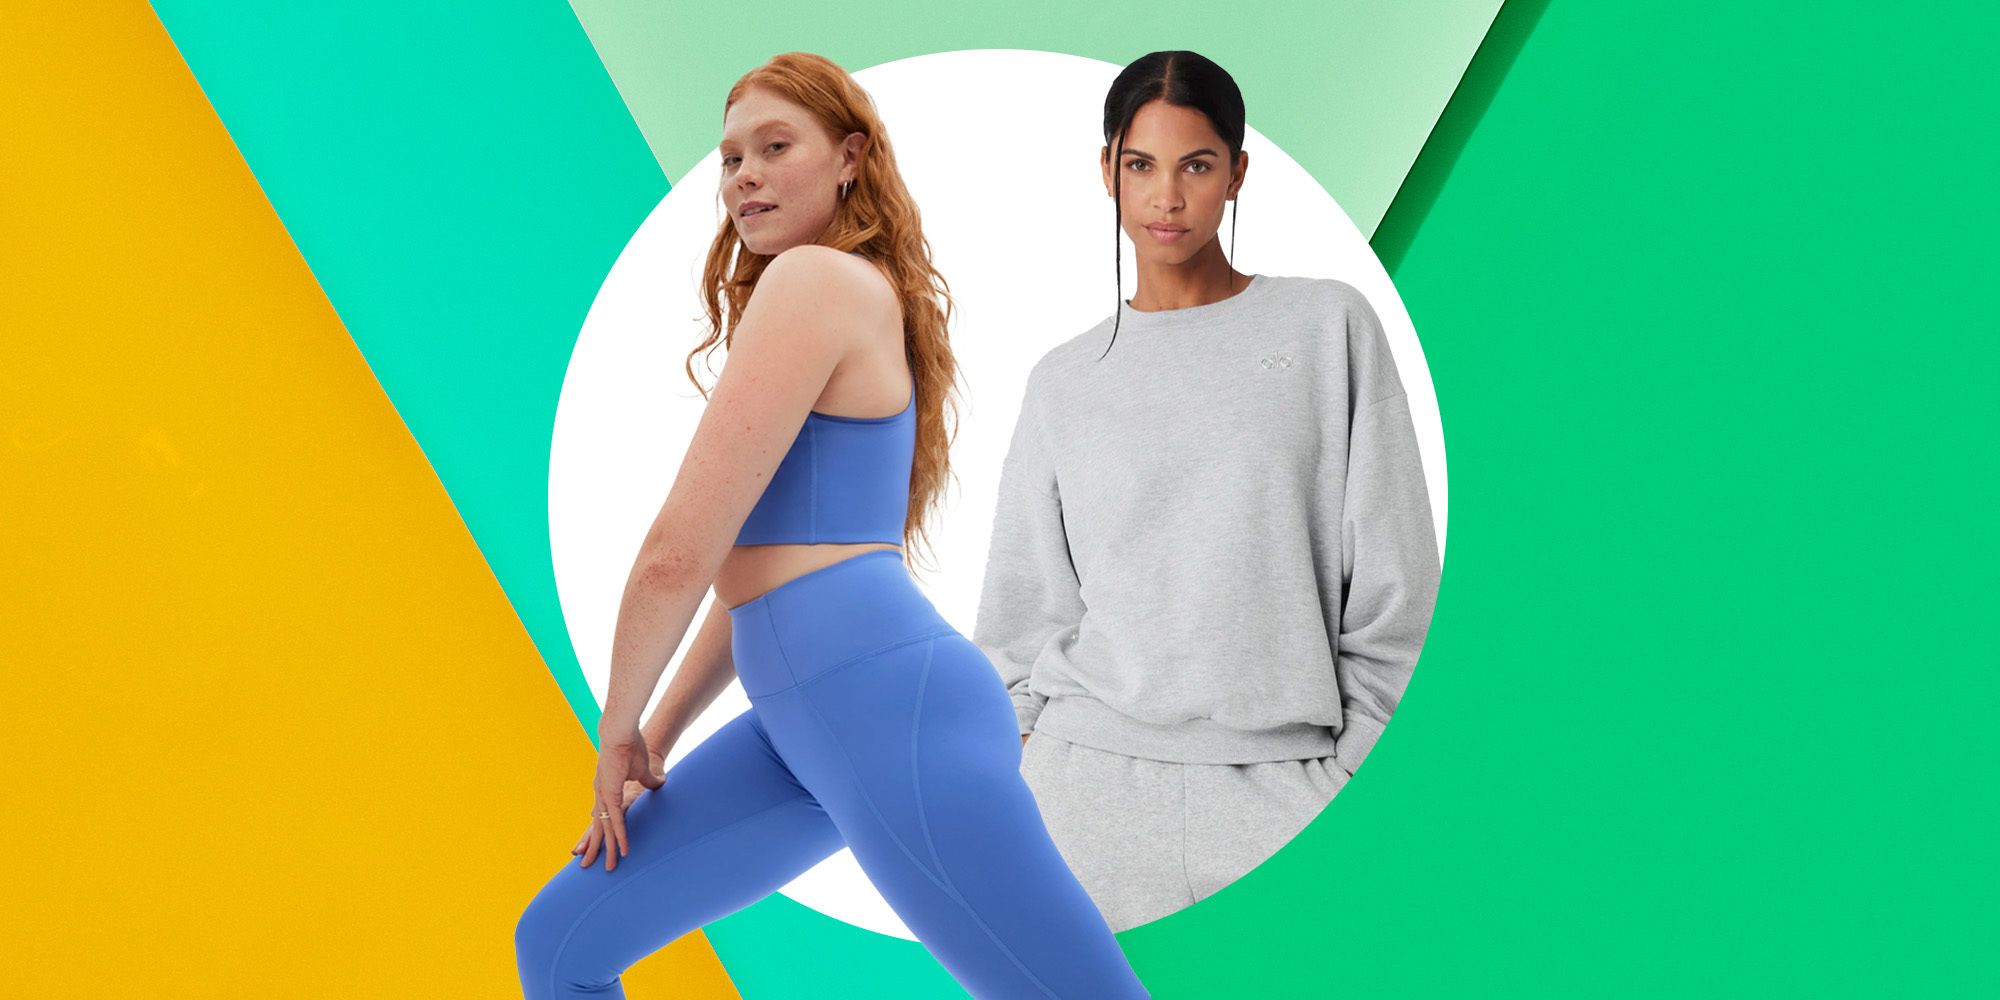 <p>Athleisure has had its grip on fashion for years now, and for good reason. Versatile <a href="https://www.womenshealthmag.com/style/a60188046/best-workout-clothes-for-women/">workout clothes</a> that double as training gear <em>and</em> WFH loungewear is straight-up genius. But finding <a href="https://www.womenshealthmag.com/style/g45375199/best-leggings-for-women/">leggings</a> and <a href="https://www.womenshealthmag.com/life/a19975067/best-sweatpants-for-women/">sweatpants</a> that are as fashionable as they are functional is no easy task—which is why we asked our editors to share their top athleisure brands to help sort through the weeds for you.</p><p>You'll notice some classic names, like <a href="https://www.womenshealthmag.com/style/g60440982/lululemon-we-made-too-much-april-2024/">Lululemon</a> and <a href="https://www.womenshealthmag.com/life/a60499466/caitlin-clark-snl-jacket/">Nike</a>, but we've also listed brands you might not think to shop from, like <a href="https://go.redirectingat.com?id=74968X1553576&url=https%3A%2F%2Fspanx.com%2Fcollections%2Fwalking%2Fproducts%2Fbooty-boost-flare-pant&sref=https%3A%2F%2Fwww.womenshealthmag.com%2Fstyle%2Fg60511196%2Fbest-athleisure-brands-for-women%2F">Spanx</a> or <a href="https://go.redirectingat.com?id=74968X1553576&url=https%3A%2F%2Fwww.freepeople.com%2Fshop%2Fone-more-serve-skortsie%2F&sref=https%3A%2F%2Fwww.womenshealthmag.com%2Fstyle%2Fg60511196%2Fbest-athleisure-brands-for-women%2F">Free People</a>. Whether you're on the hunt for a matching set that makes you feel more put together while traveling, or a hoodie you can pair with leggings or jeans depending on the day, these brands offer a wide range of options. </p><p>Ready to find your new favorite <a href="https://www.womenshealthmag.com/fitness/g22747030/best-yoga-pants-women/">yoga pants</a> for coffee trips or an <a href="https://www.womenshealthmag.com/fitness/g39654184/best-exercise-dresses/">exercise dress</a> to keep you cool during hot summer days? Clearly, athleisure items can be some of the most versatile pieces you own, so long as you shop with a few key factors in mind:</p><h2 class="body-h2">What to consider</h2><h4 class="body-h4"><strong>Prices</strong></h4><p>While athletic clothes are probably some of the more casual items in your closet, a lot of popular brands list the lounge pieces surprisingly high. But thanks to the popularity of the style trend, we found brands at a range of price points and for every budget.</p><h4 class="body-h4">Size Ranges</h4><p>The brands we've ranked highly have notably inclusive size ranges, including extended sizes, length options for pants and leggings, cup sizes for sports bras, and more. However, each brand offers different measurement ranges, so check the brand's guidelines before buying. Notably, Girlfriend Collective has the largest size range of our top brands, with leggings going from XXS up to 6XL.</p><h4 class="body-h4">How You'll Wear the Items</h4><p>If you're looking to add pieces that double as workout gear, keep an eye out for fabrics that are moisture-wicking and breathable. Options like the Nulu fabric from Lululemon will be comfortable for low-impact workouts (think: yoga, Pilates, hot girl walks!). If you're looking for true loungewear that's more structured than your standard sweatpants, soft cotton and relaxed silhouettes will do the trick. Styles like Vuori's joggers still show off your frame, while being less compressive and restrictive than leggings.</p><h2 class="body-h2">How we chose </h2><p>We shared our top 16 brands after polling our editors to find out which athleisure brands they love the most. Having tested a wide range of products over the years, we also included some of our editors' favorite pieces from each brand to help you get started shopping.</p>